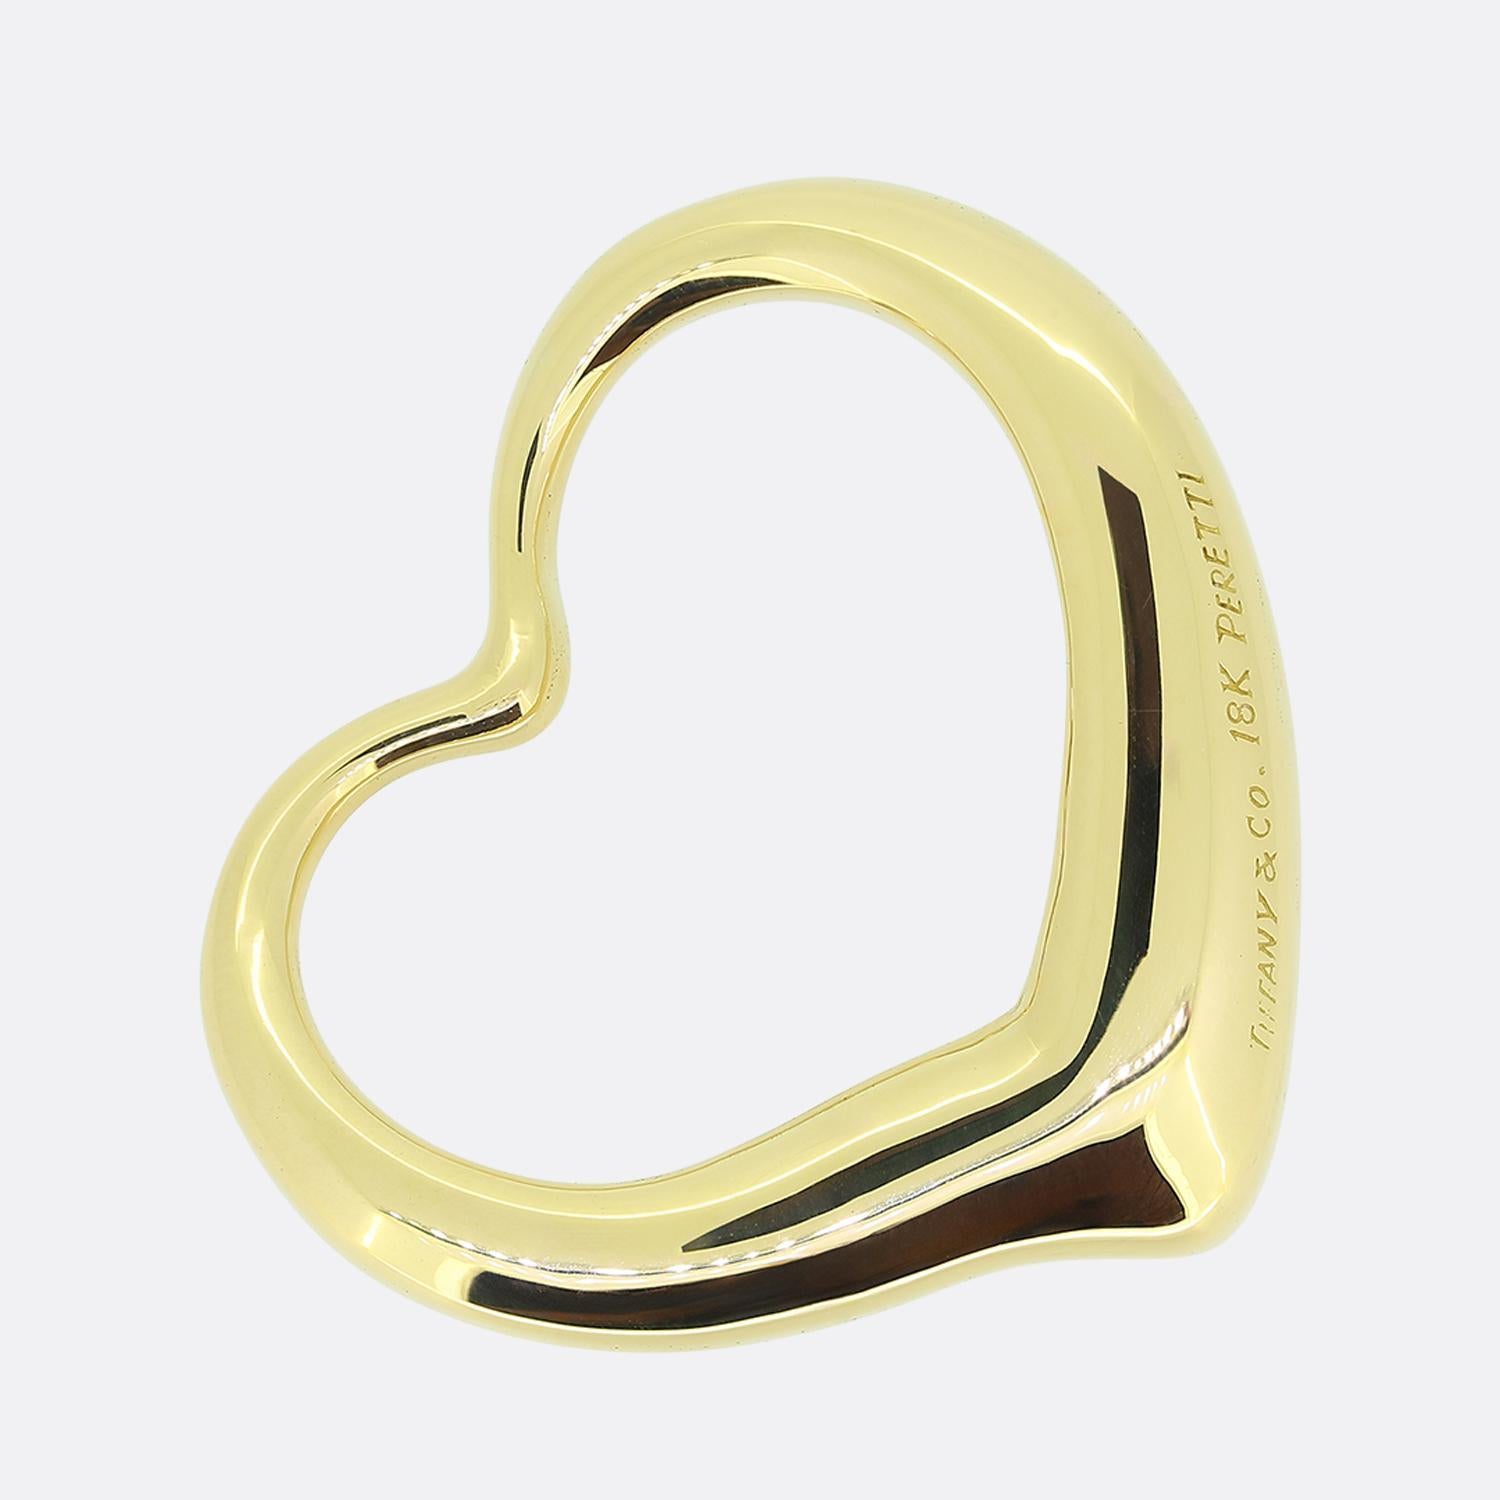 Here we have a beautifully crafted pendant from the world renowned jewellery designer, Tiffany & Co. Forming part of the Elsa Peretti collection, this open heart design celebrates the spirit of love. Crafted from 18ct yellow gold, the elegant curves